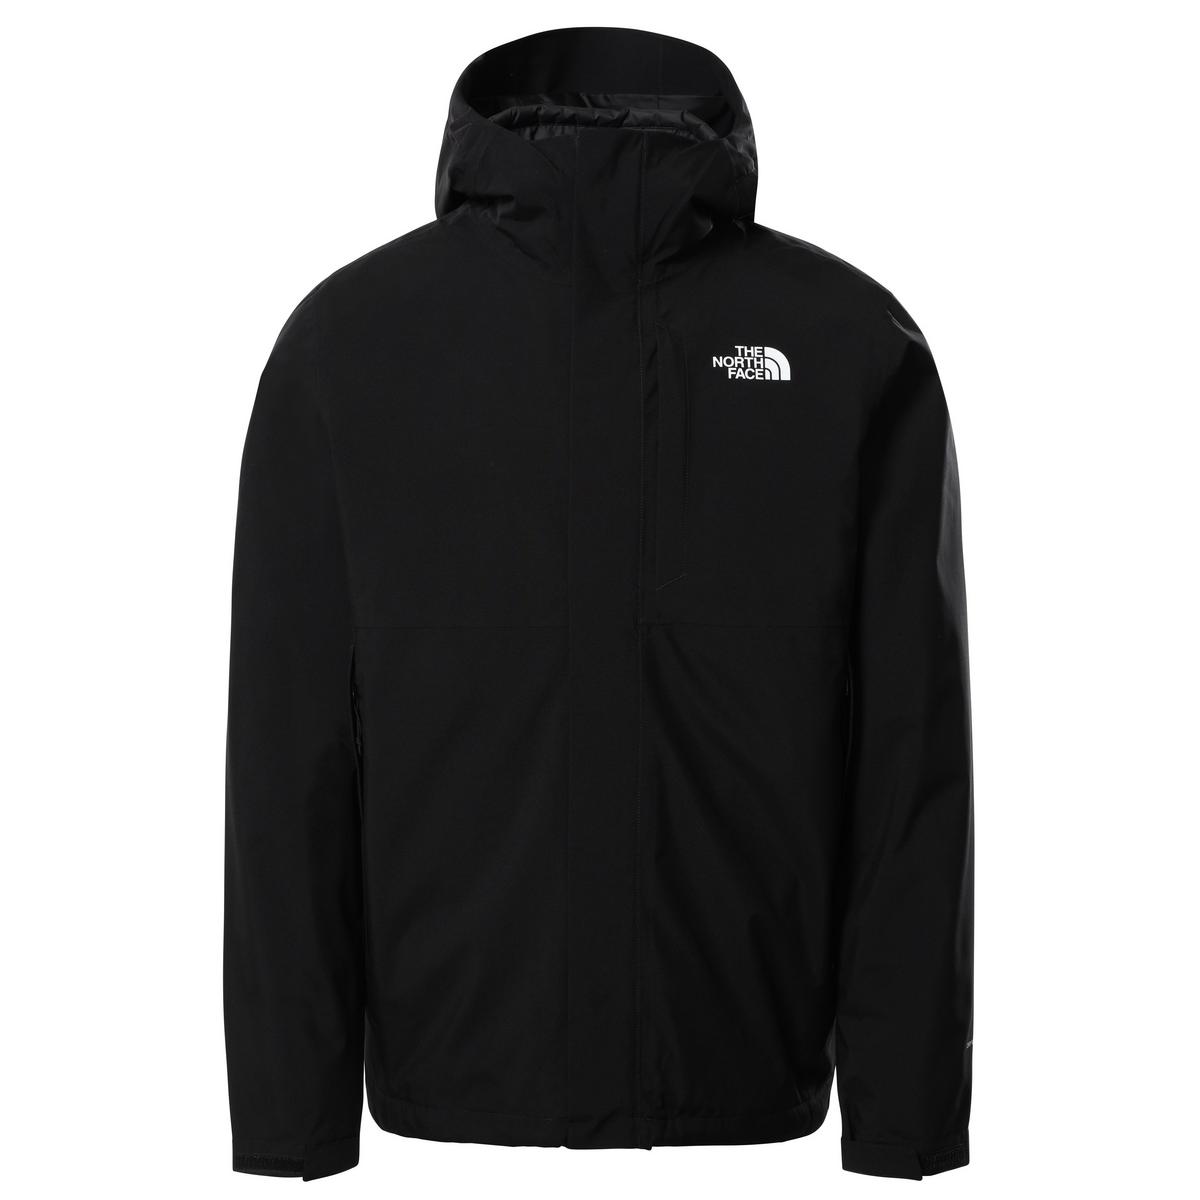 The North Face Men's Carto Triclimate Jacket - Black